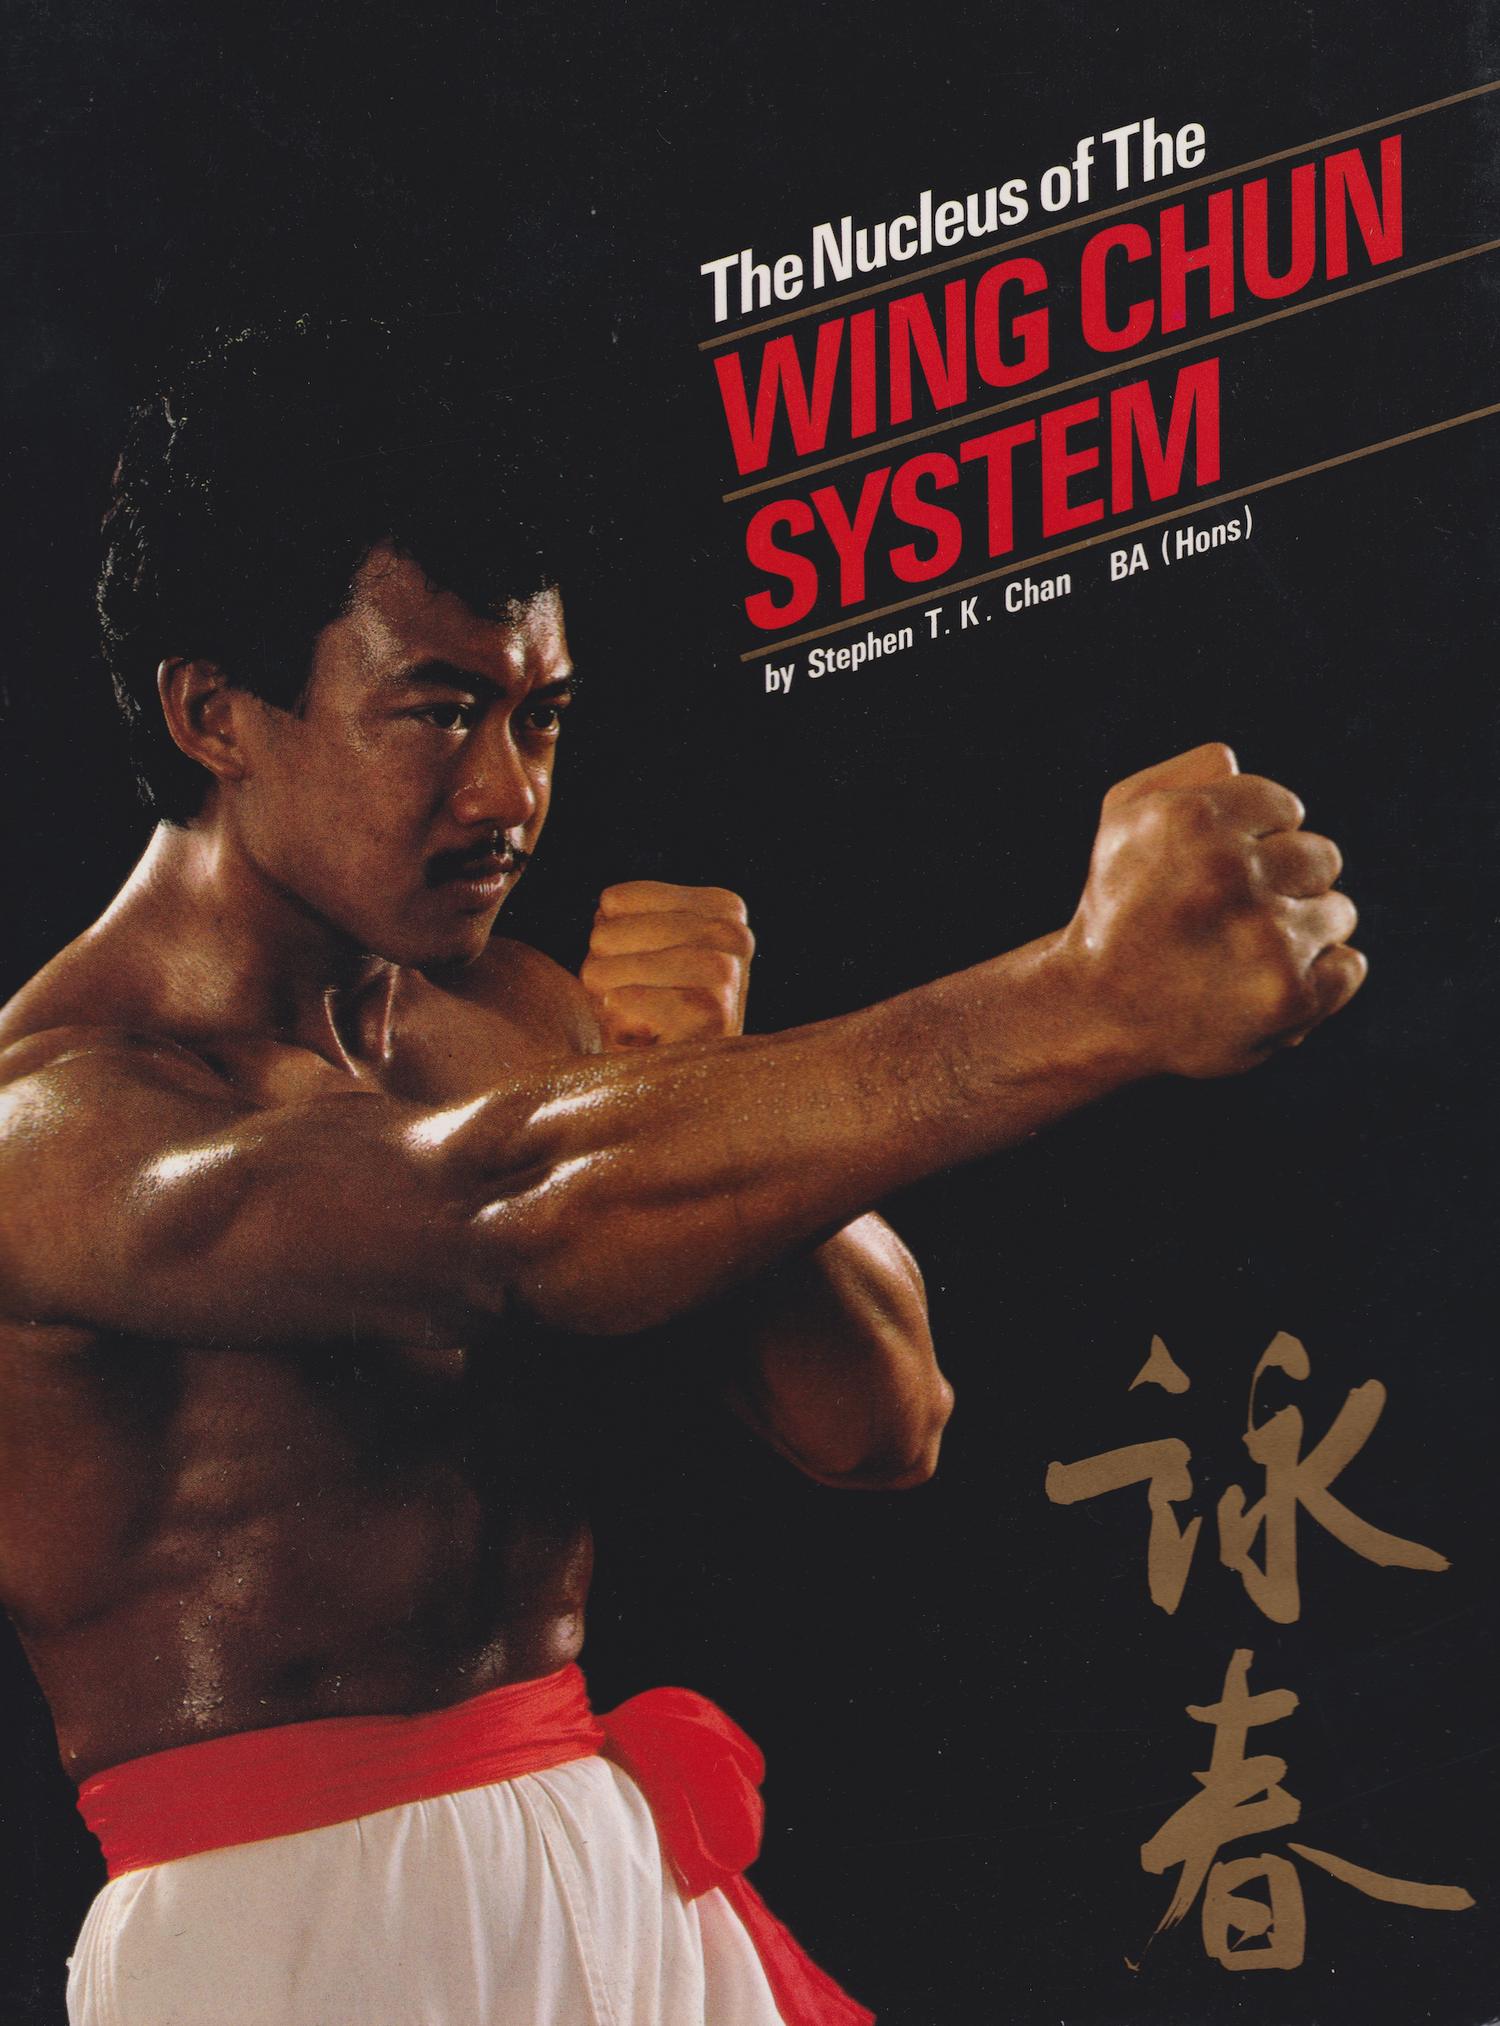 The Nucleus of the Wing Chun System Book by Stephan Chan (Hardcover)